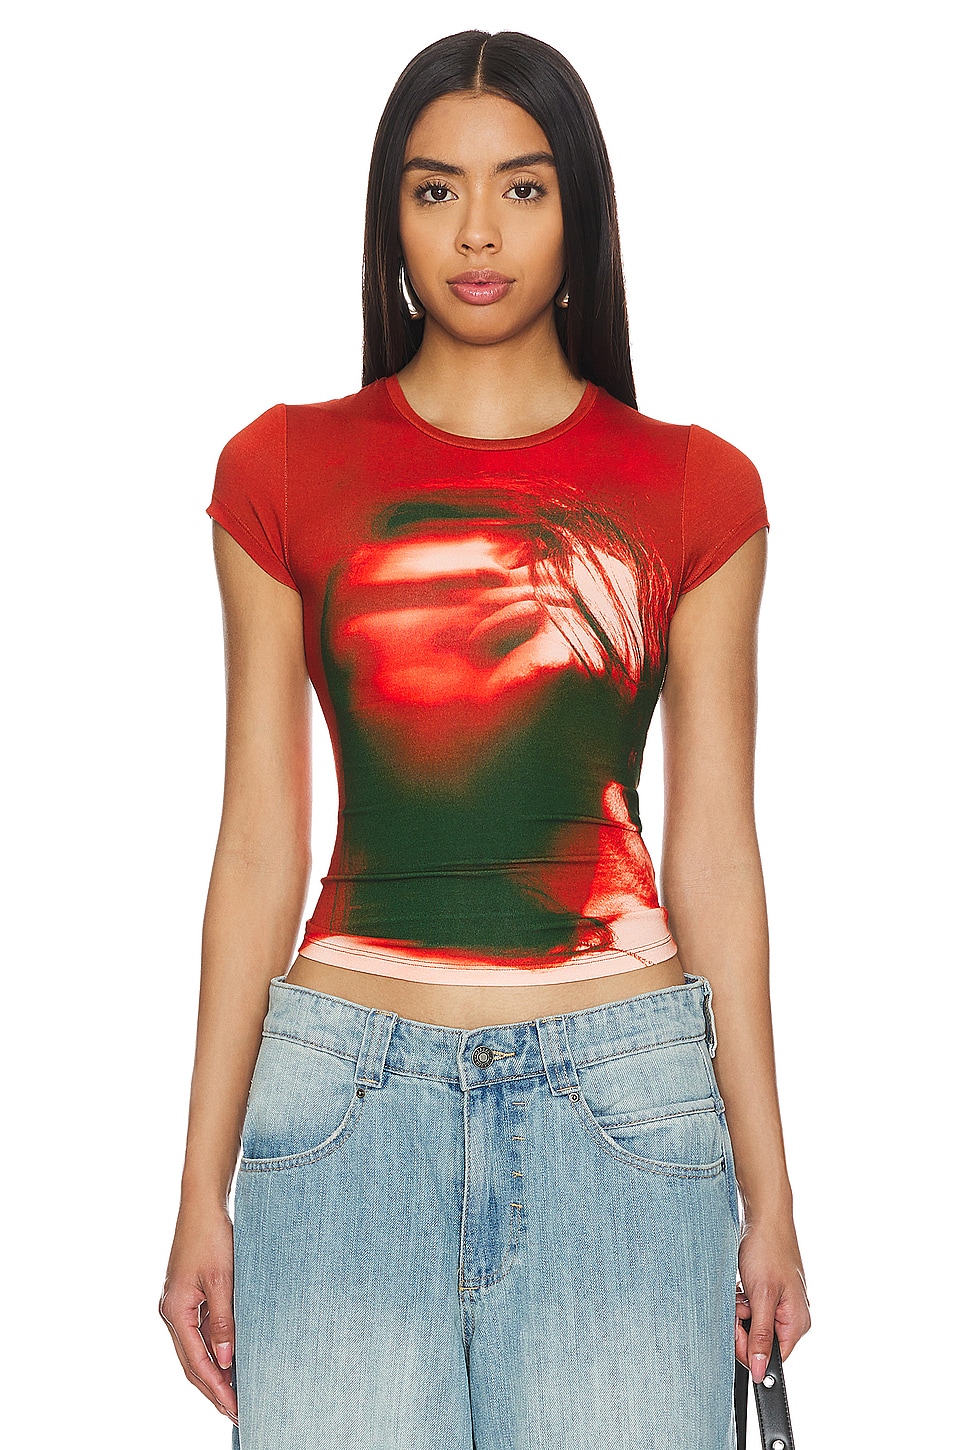 Alexander Wang Cropped Crewneck Tee in Barberry